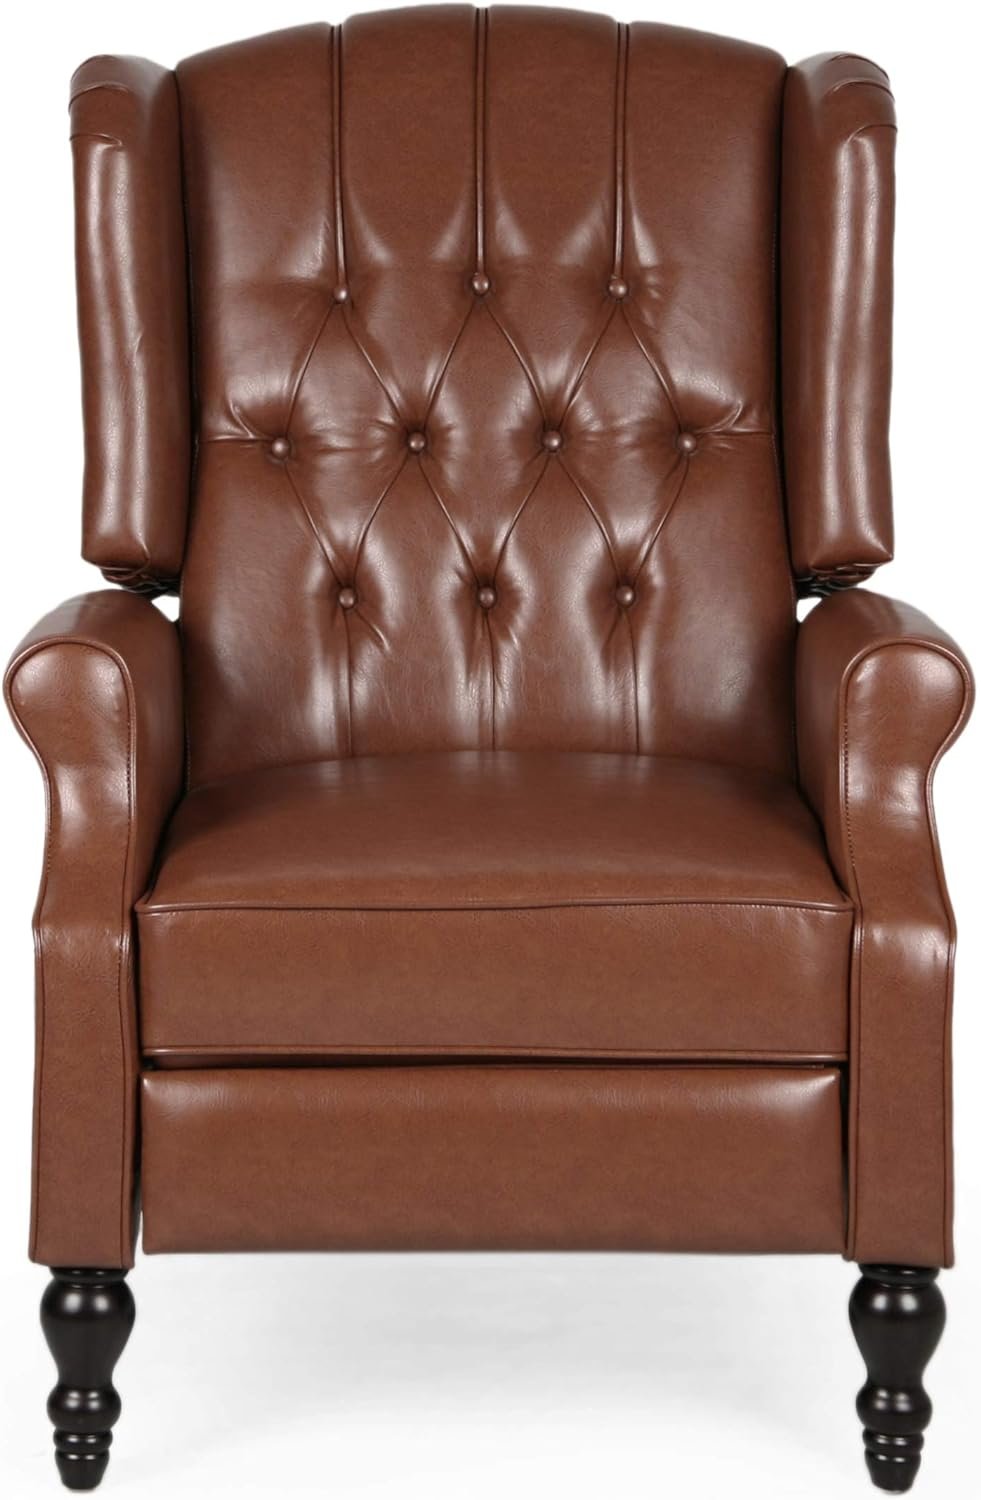 Randy Contemporary Tufted Recliner Review